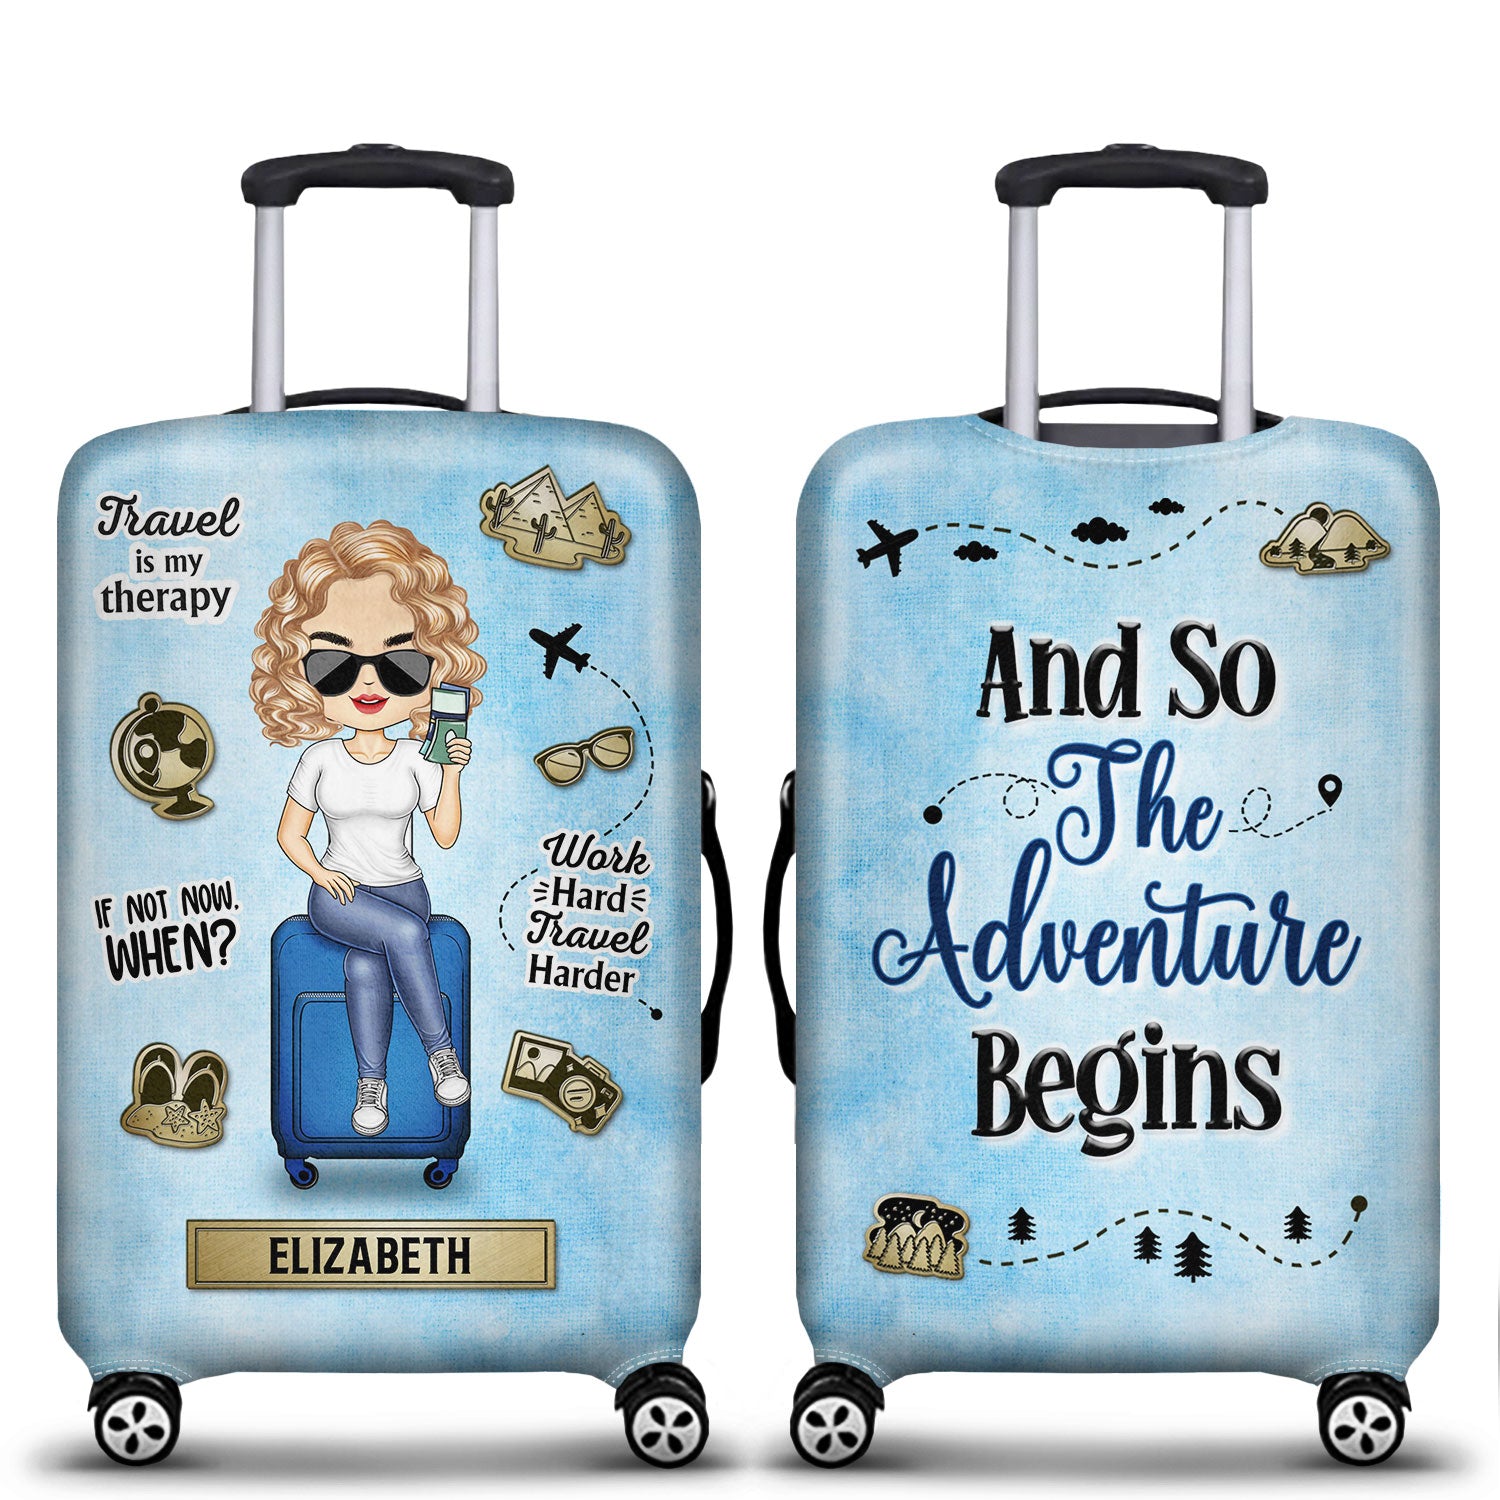 And So The Adventure Begins - Birthday Gift For Him, Her, Kid, Family, Travel, Vacation Lovers - Personalized Custom Luggage Cover